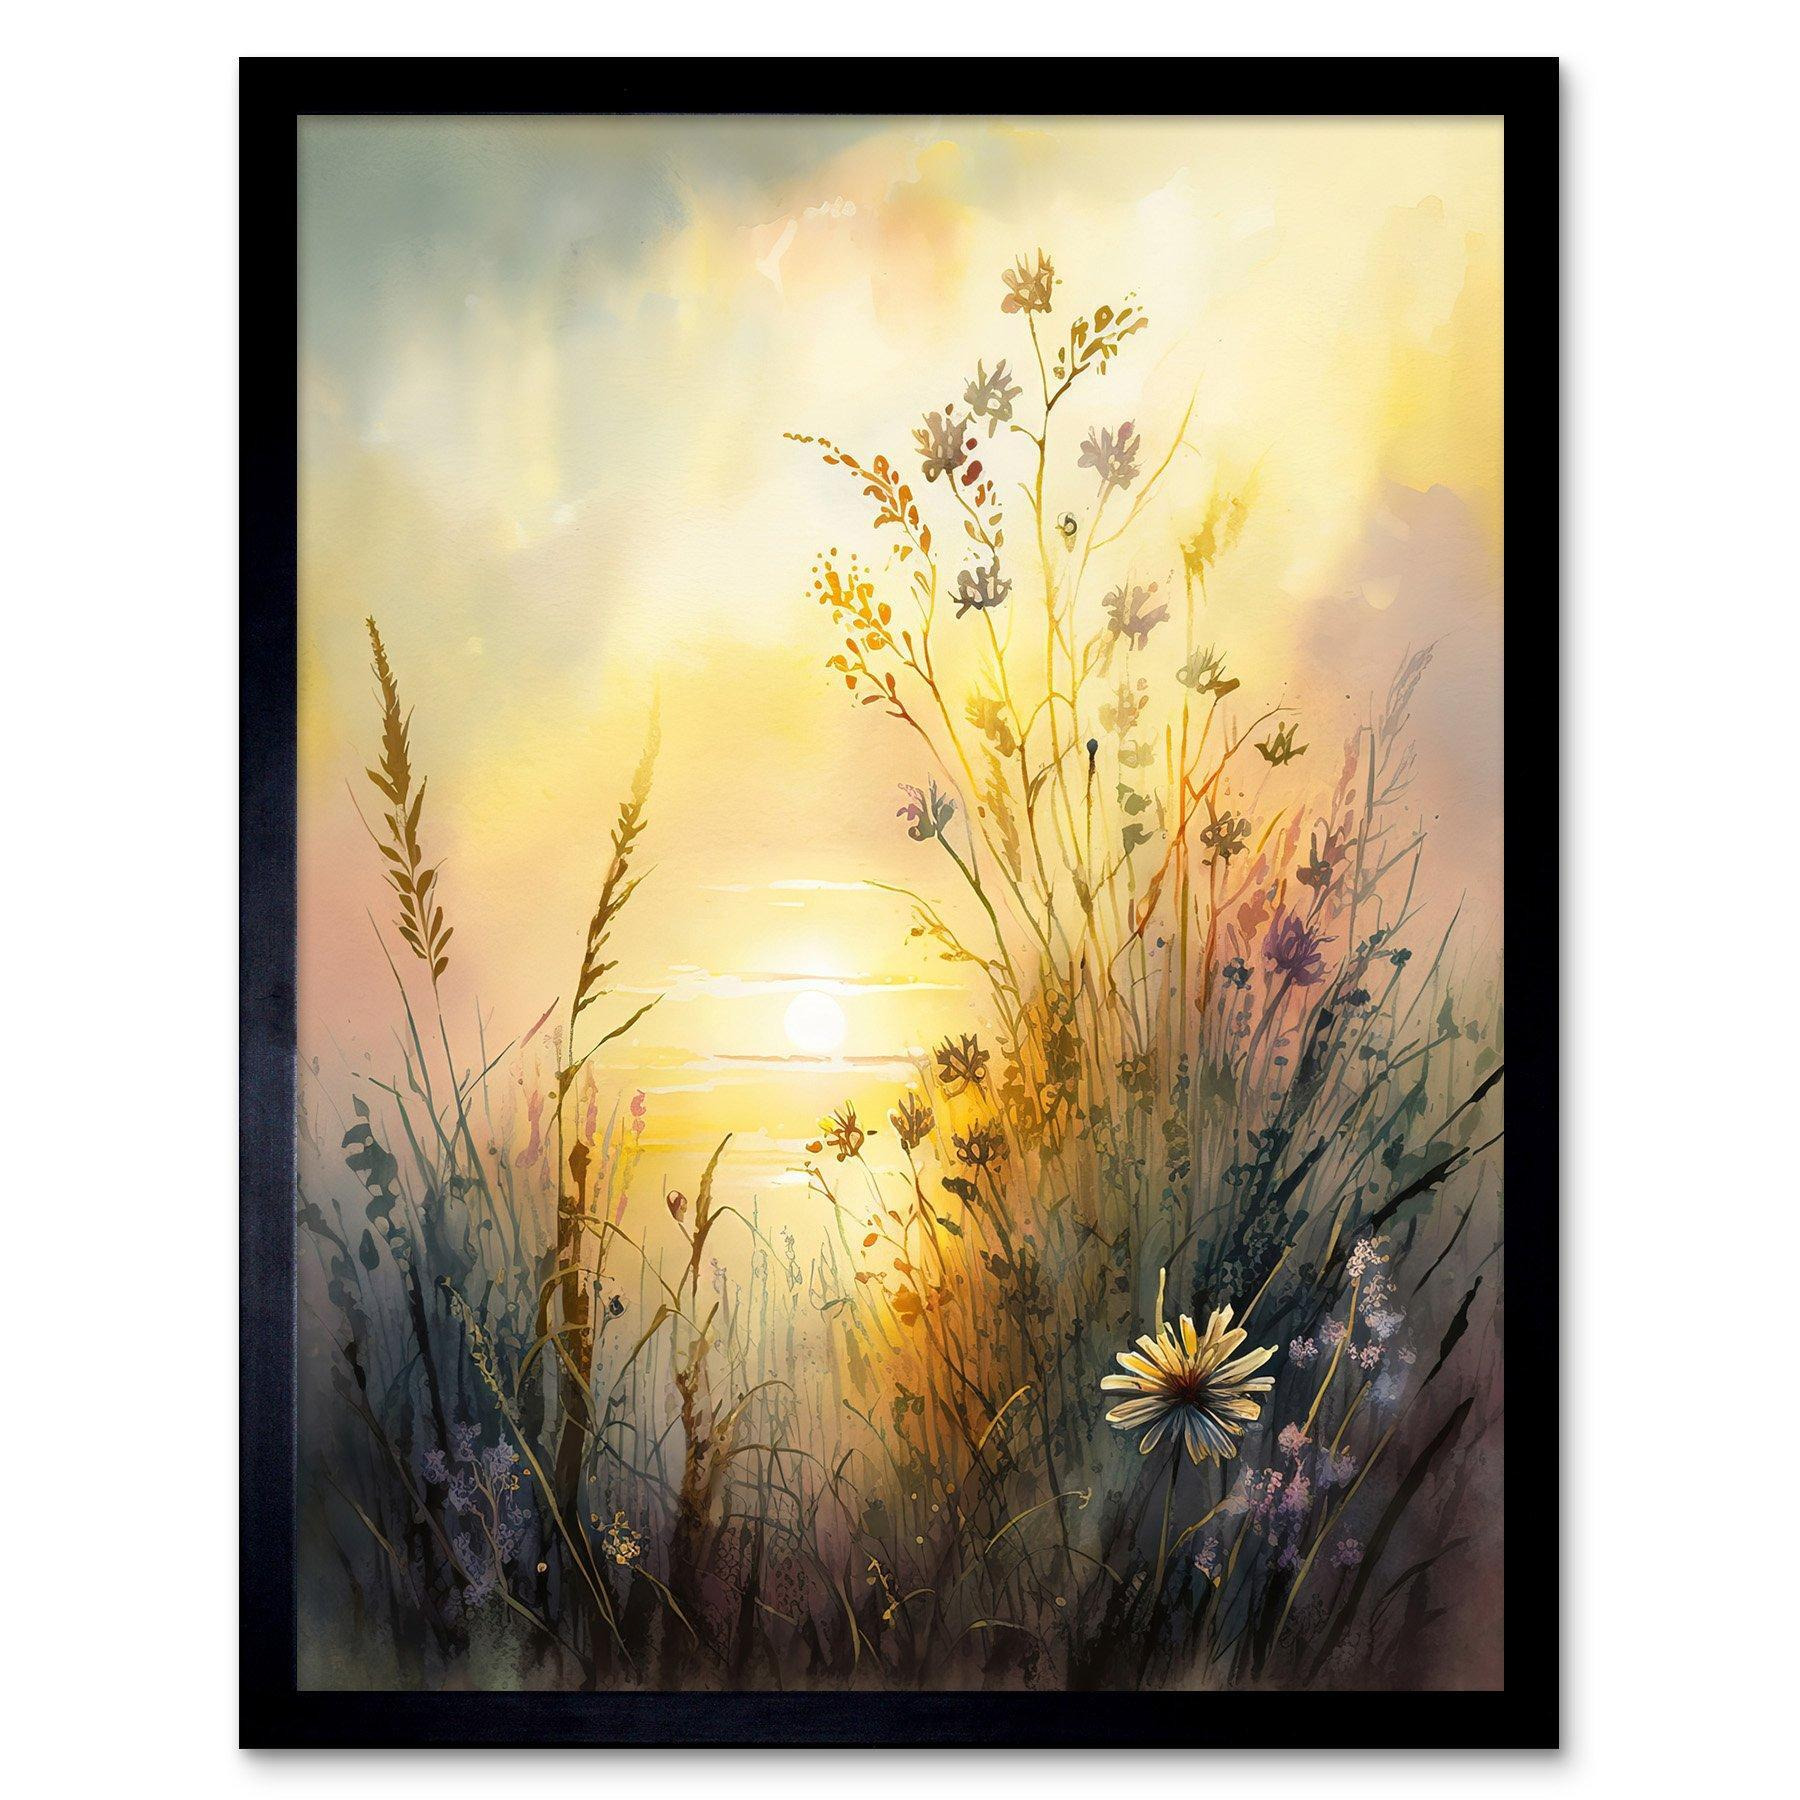 Wildflower by Lakeside on a Misty Morning Sunrise Modern Watercolour Painting Art Print Framed Poster Wall Decor 12x16 inch - image 1